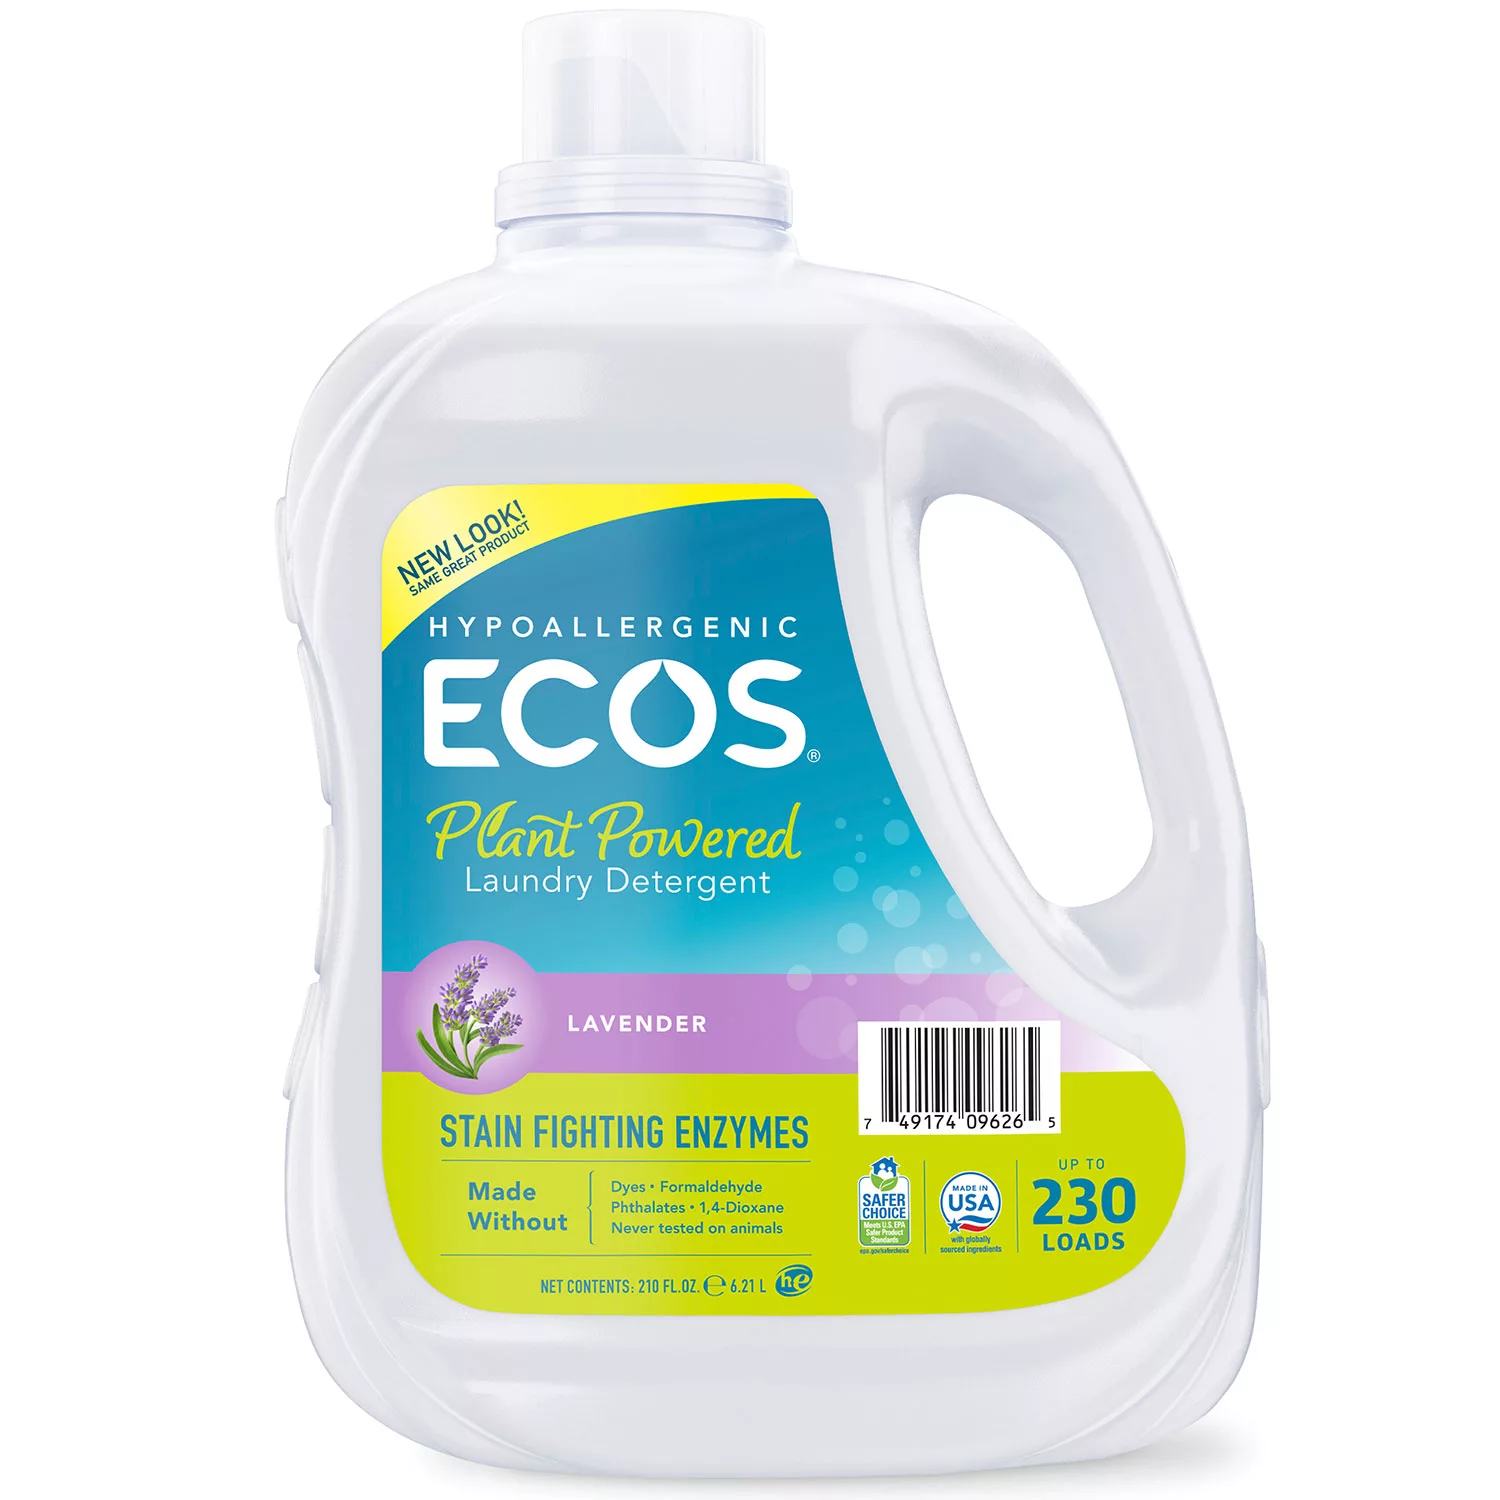 ECOS Plus with Stain-Fighting Enzymes Laundry Detergernt – 210 fl. oz.